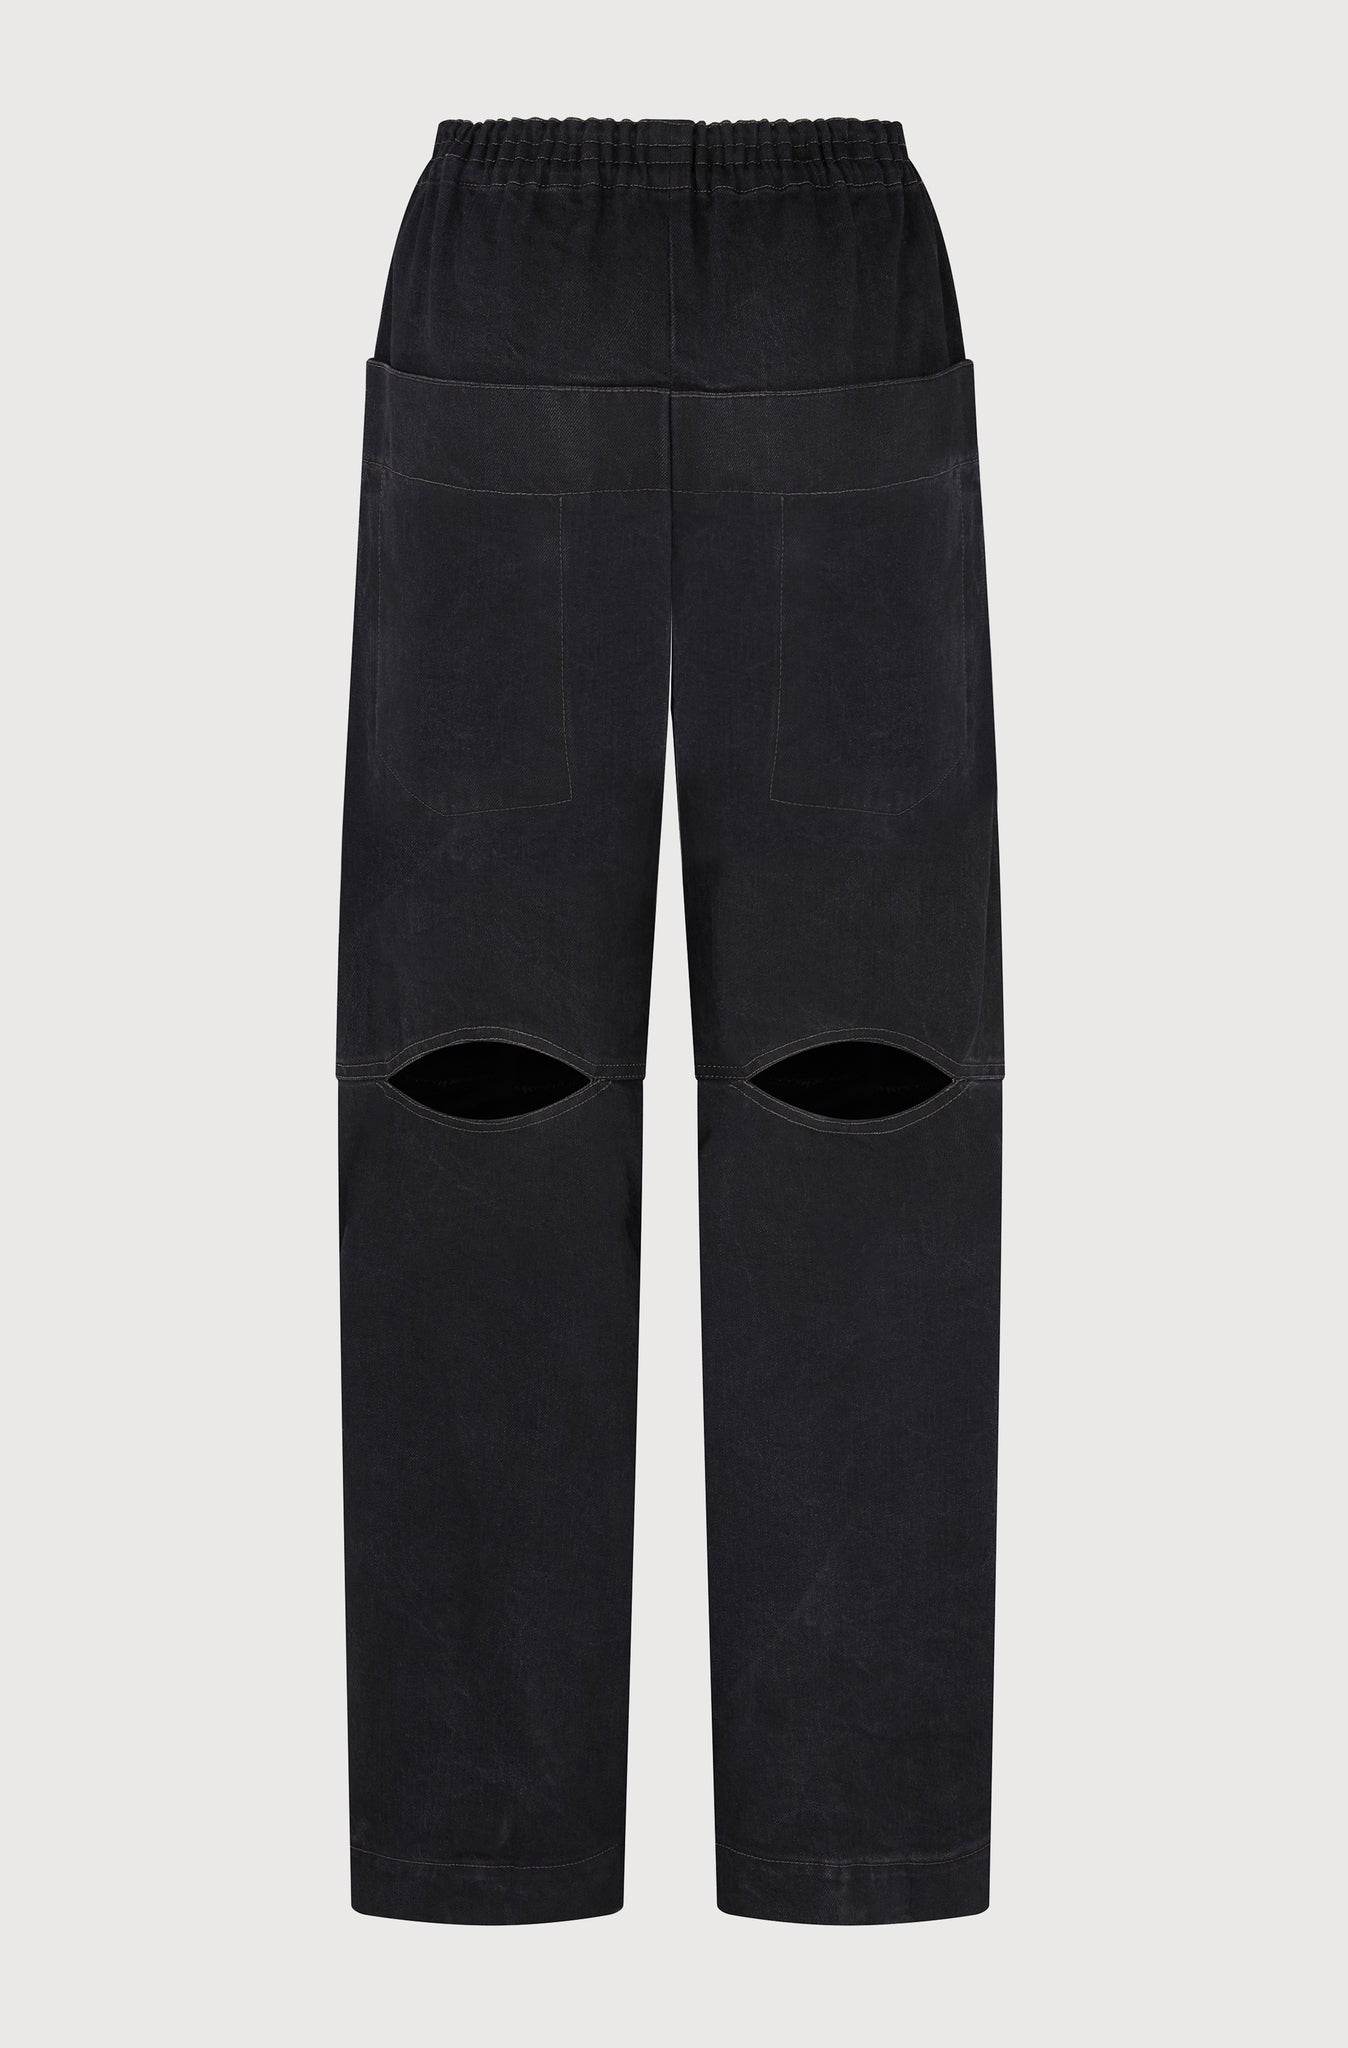 DROPPED FRONT TROUSERS - BLACK DENIM